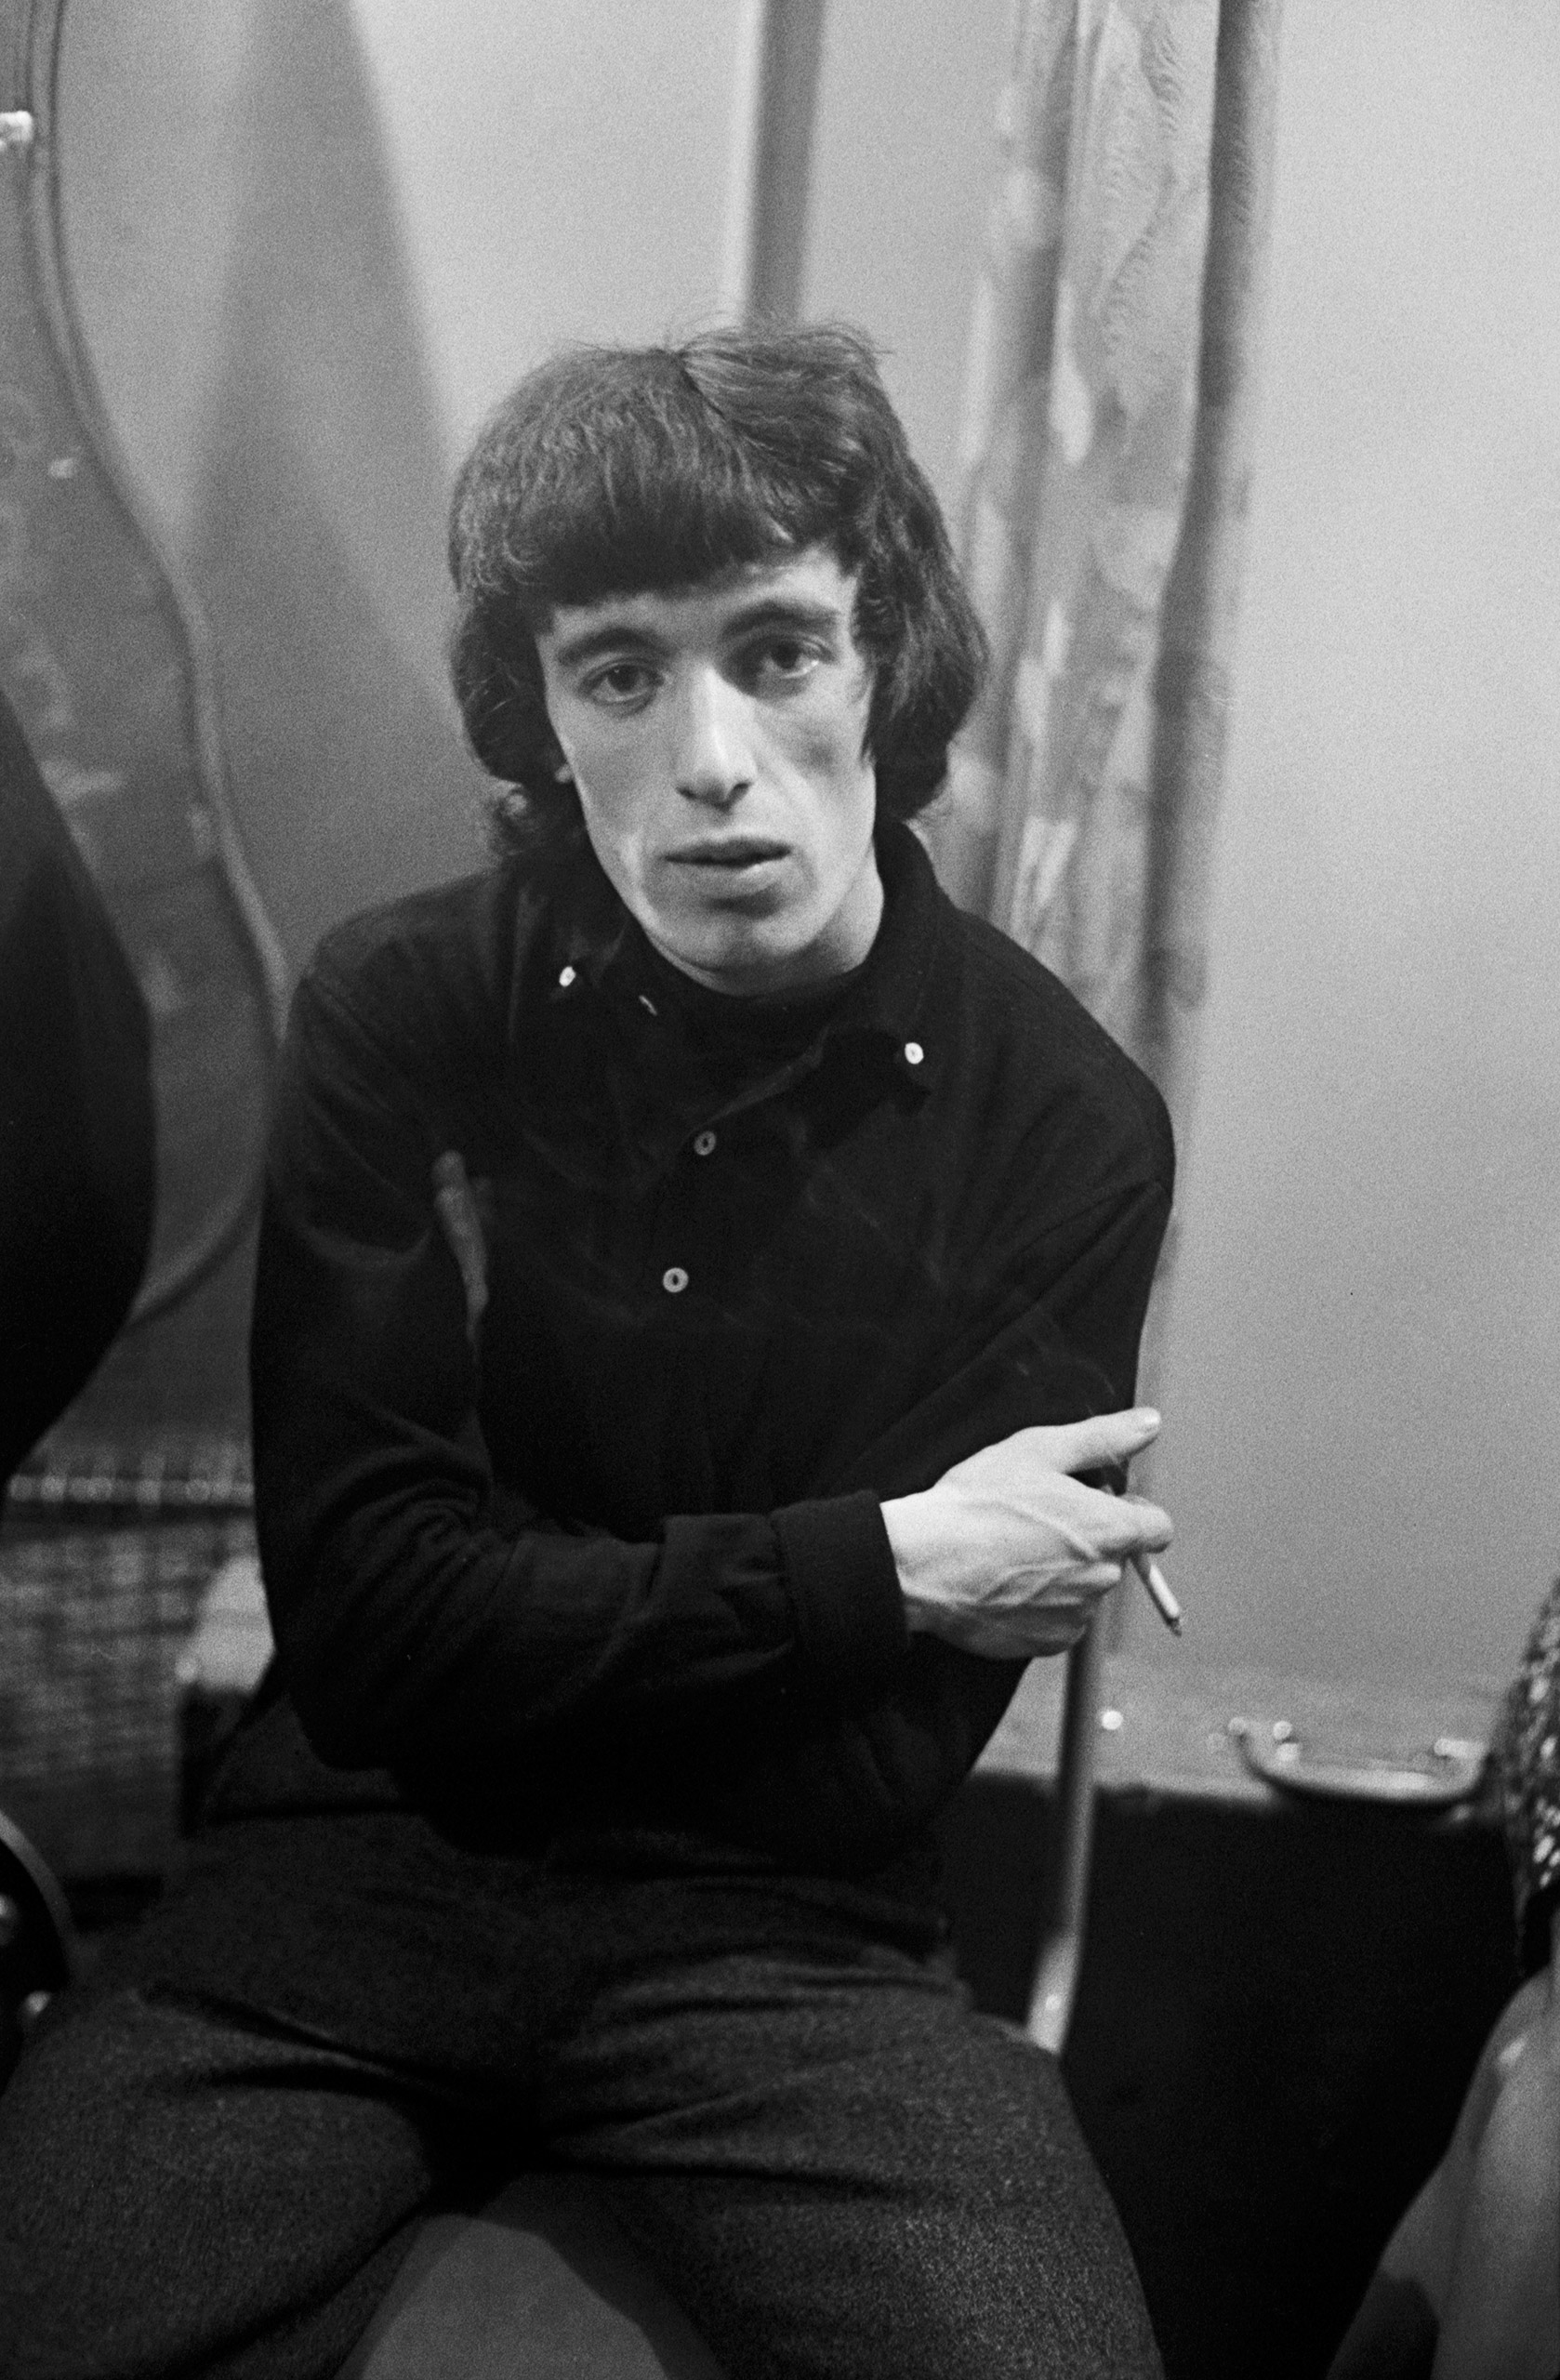 Bill Wyman, bassist for The Rolling Stones backstage in 1964.